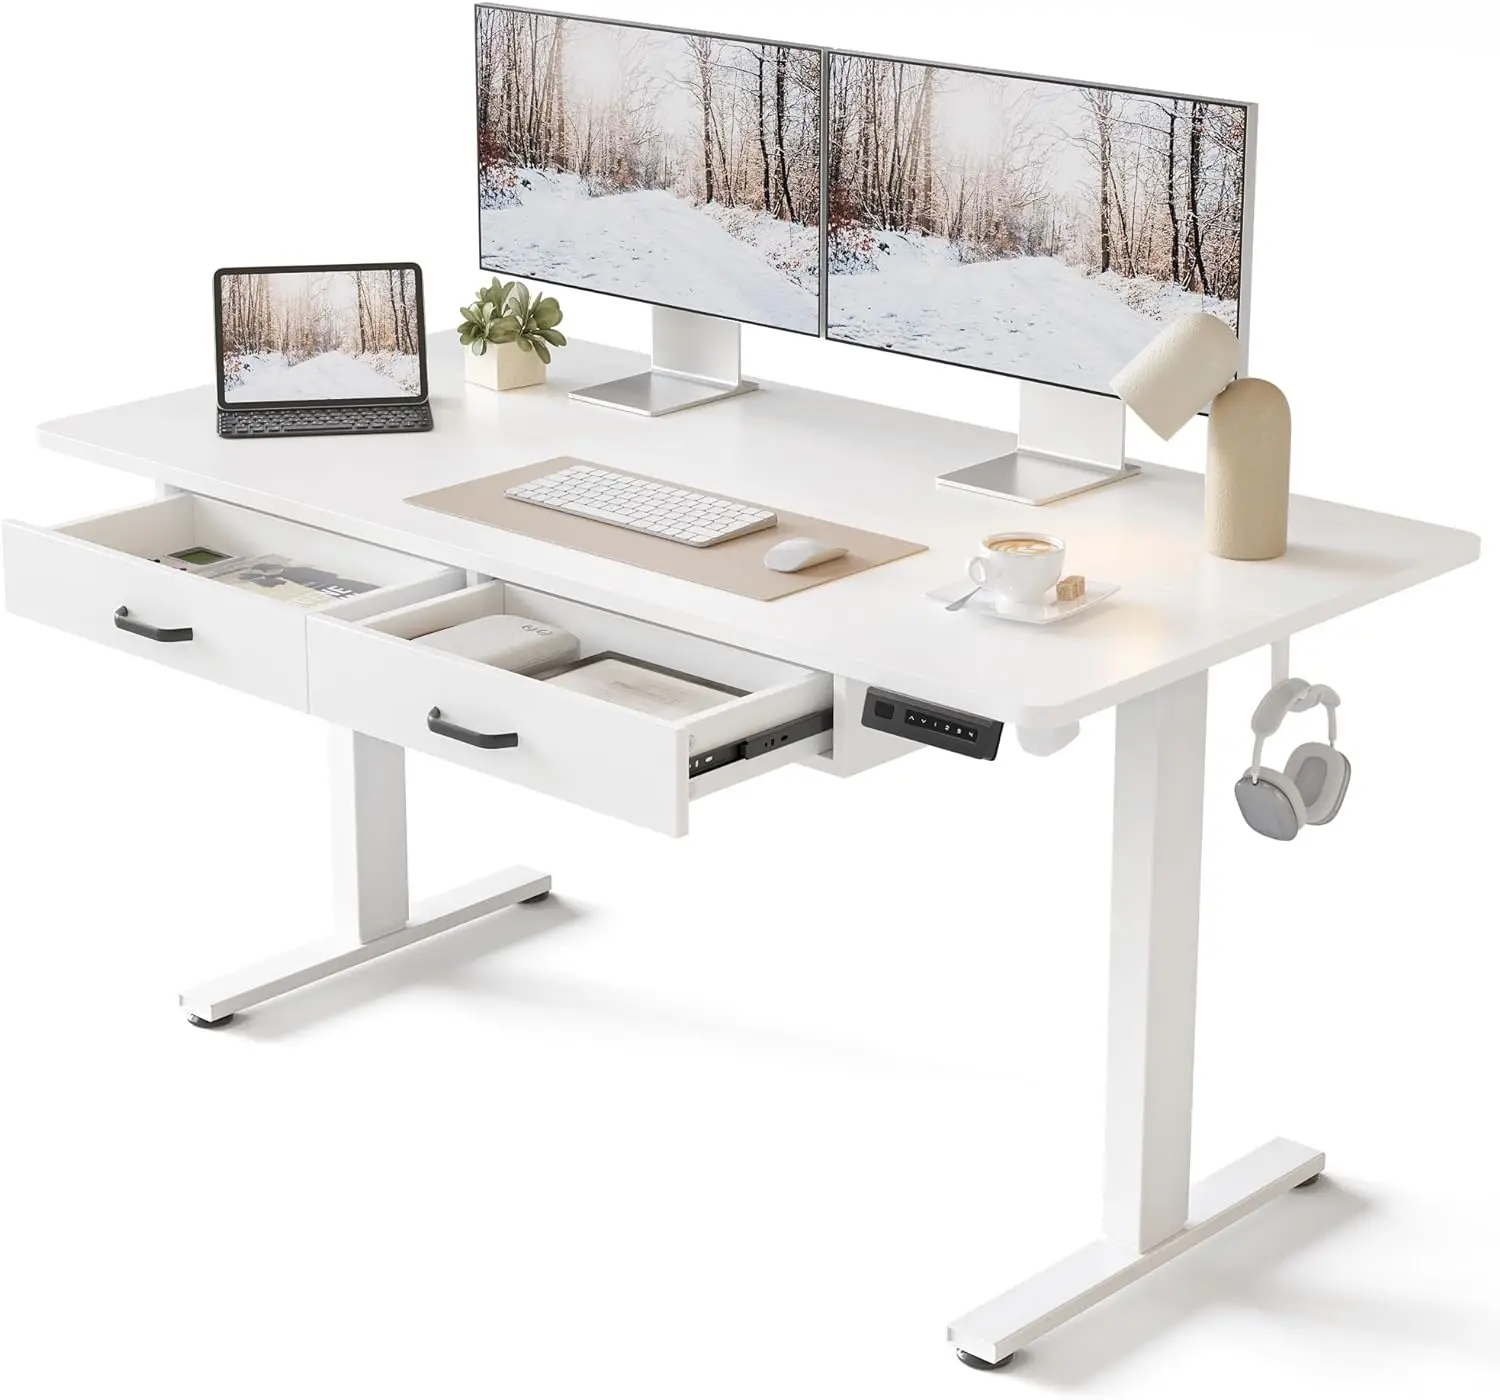 

FEZIBO Adjustable Height Electric Stas Stand Up Home Office Desk with Splice Tabletop, White Frame/White Top